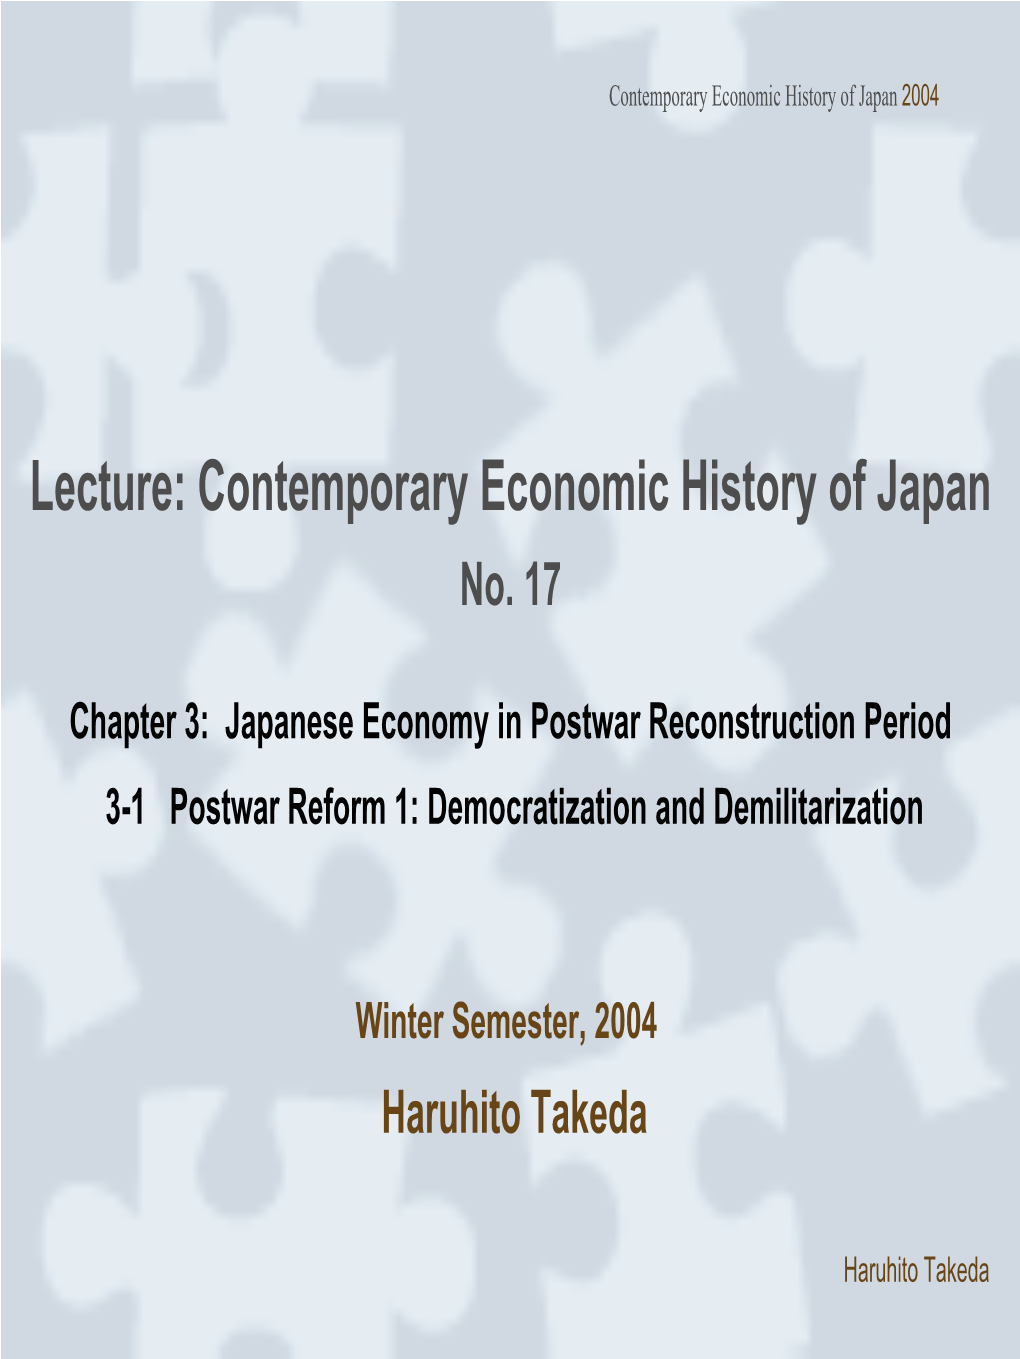 Lecture: Contemporary Economic History of Japan No